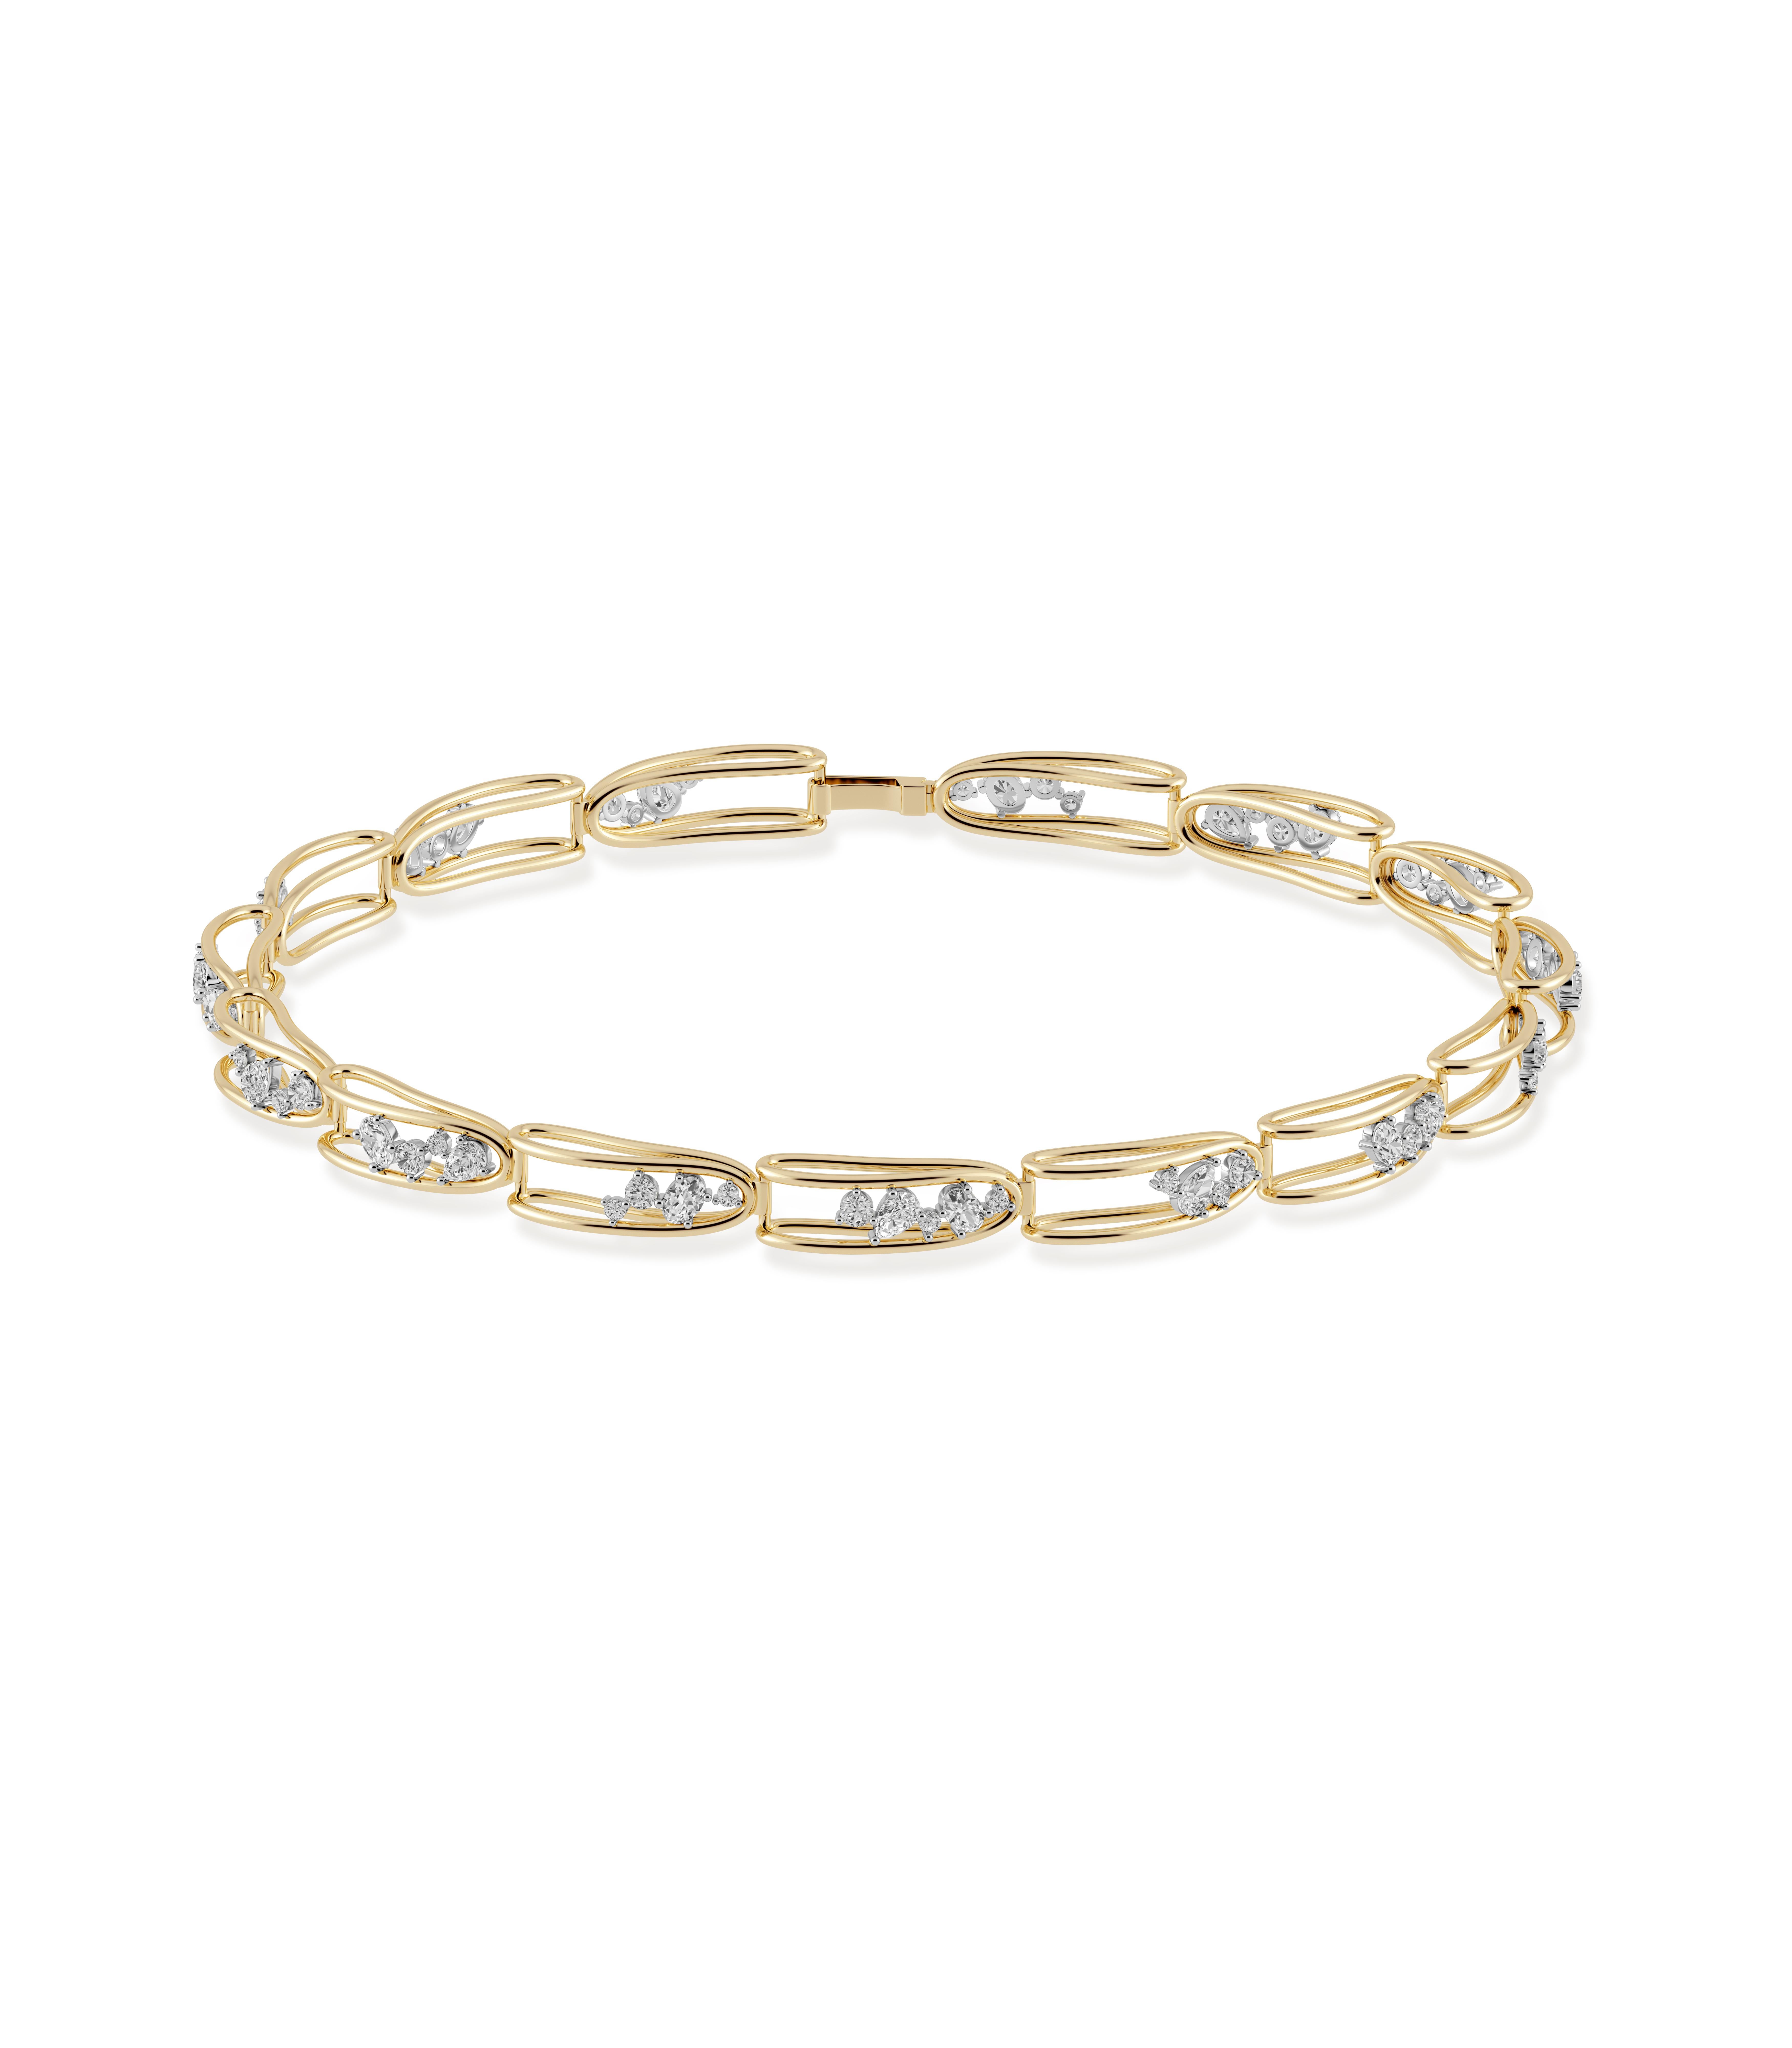 Our Mara Folded Links Choker is made in 18K gold with varying sized round, pear and oval shaped natural diamonds set in platinum. Featuring asymmetrical diamond filled links. 

The Mara Collection was built around the beauty of negative space and